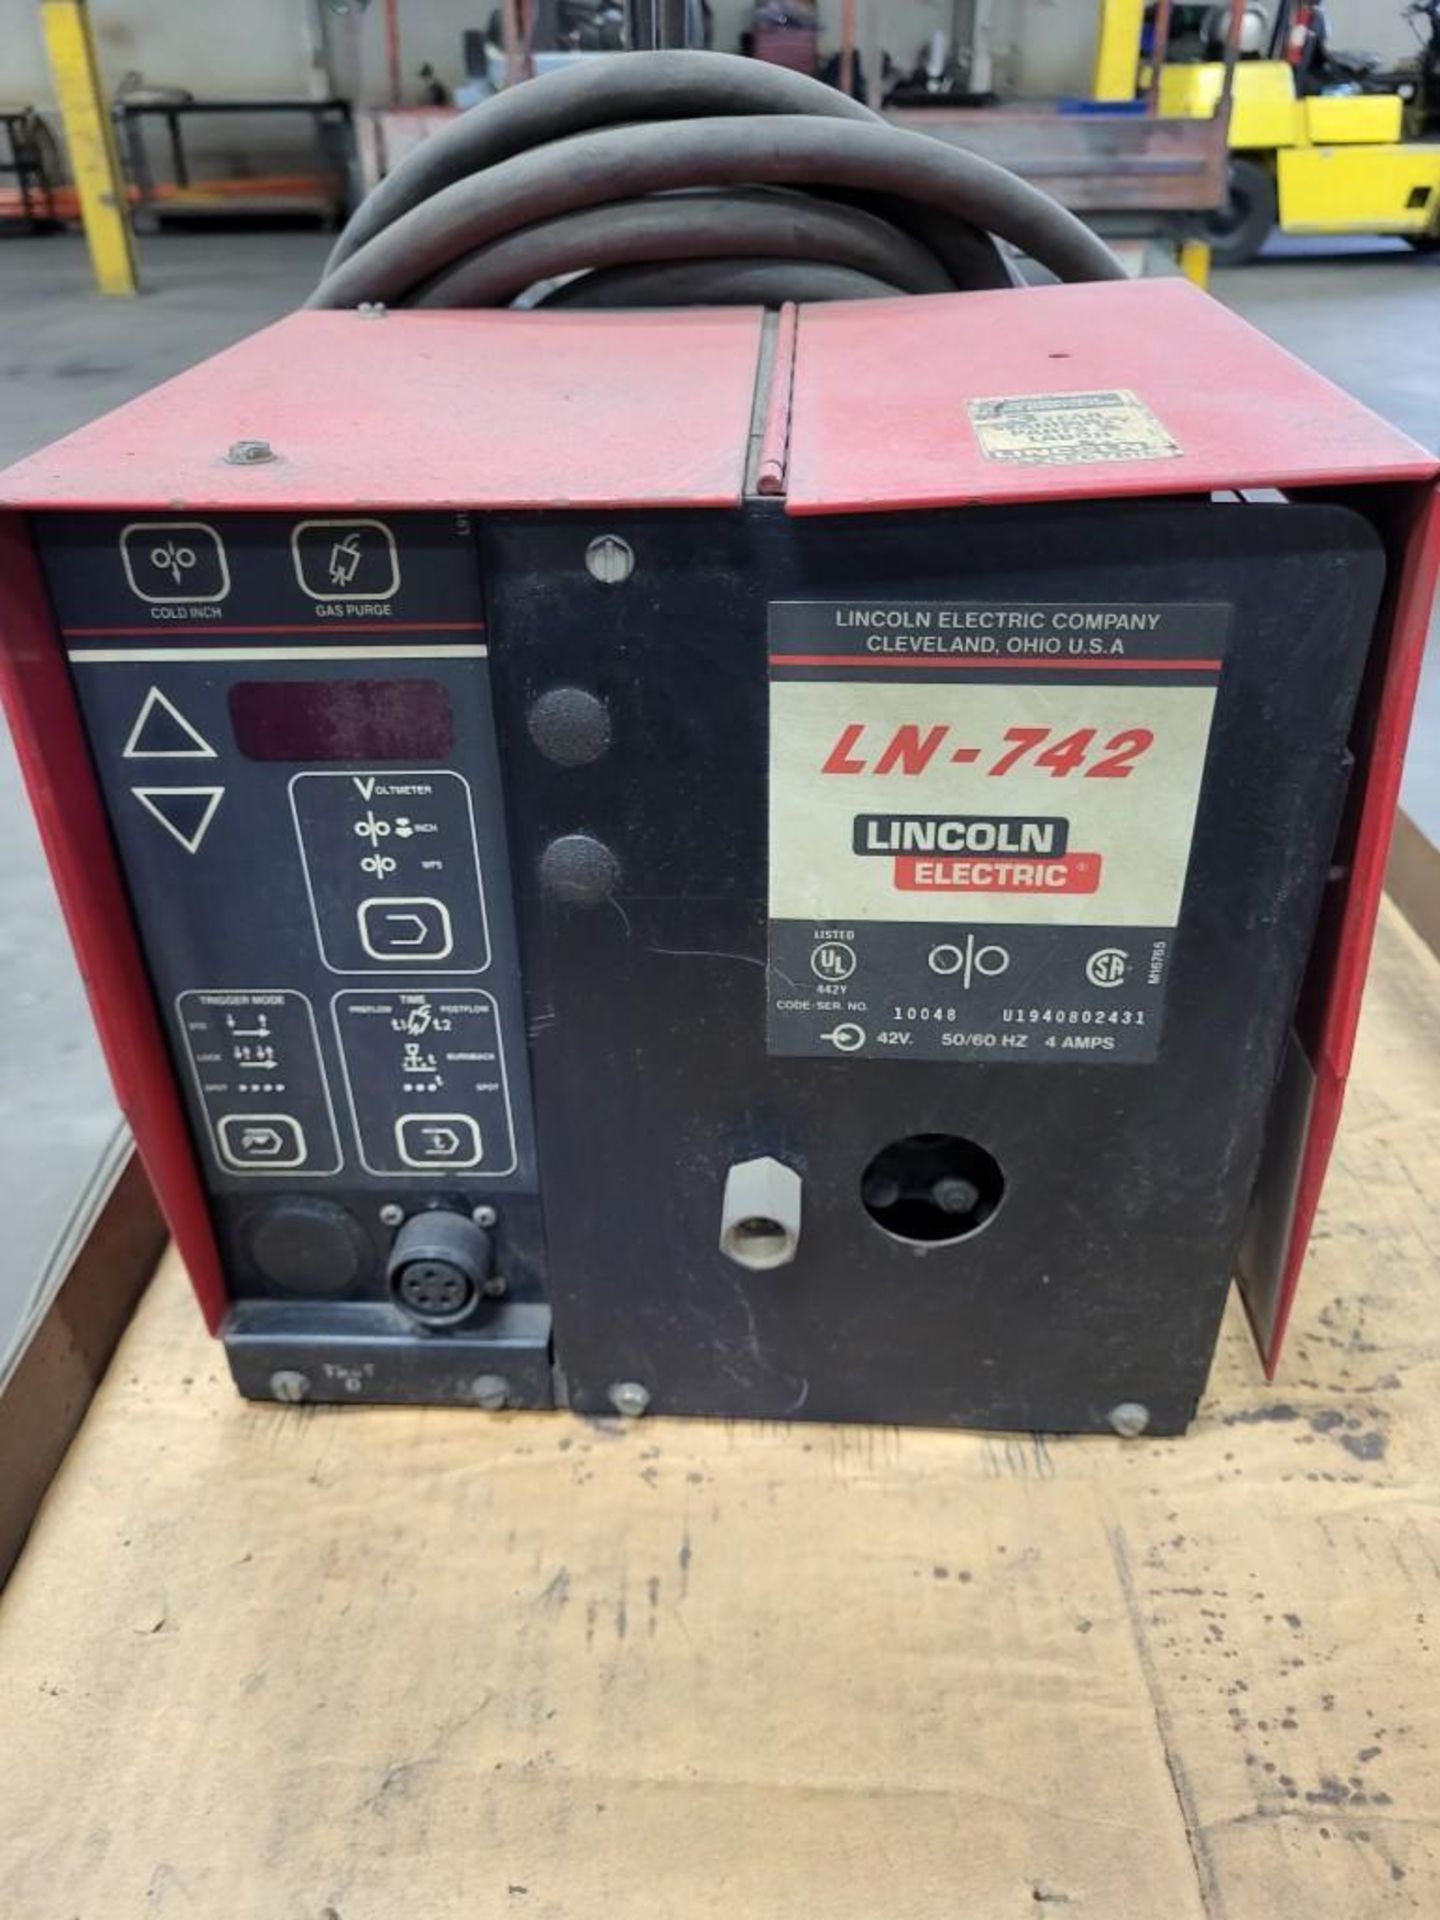 LINCOLN ELECTRIC INVERTEC STT MIG WELDER WITH LN-742 WIREFEEDER - Image 6 of 9